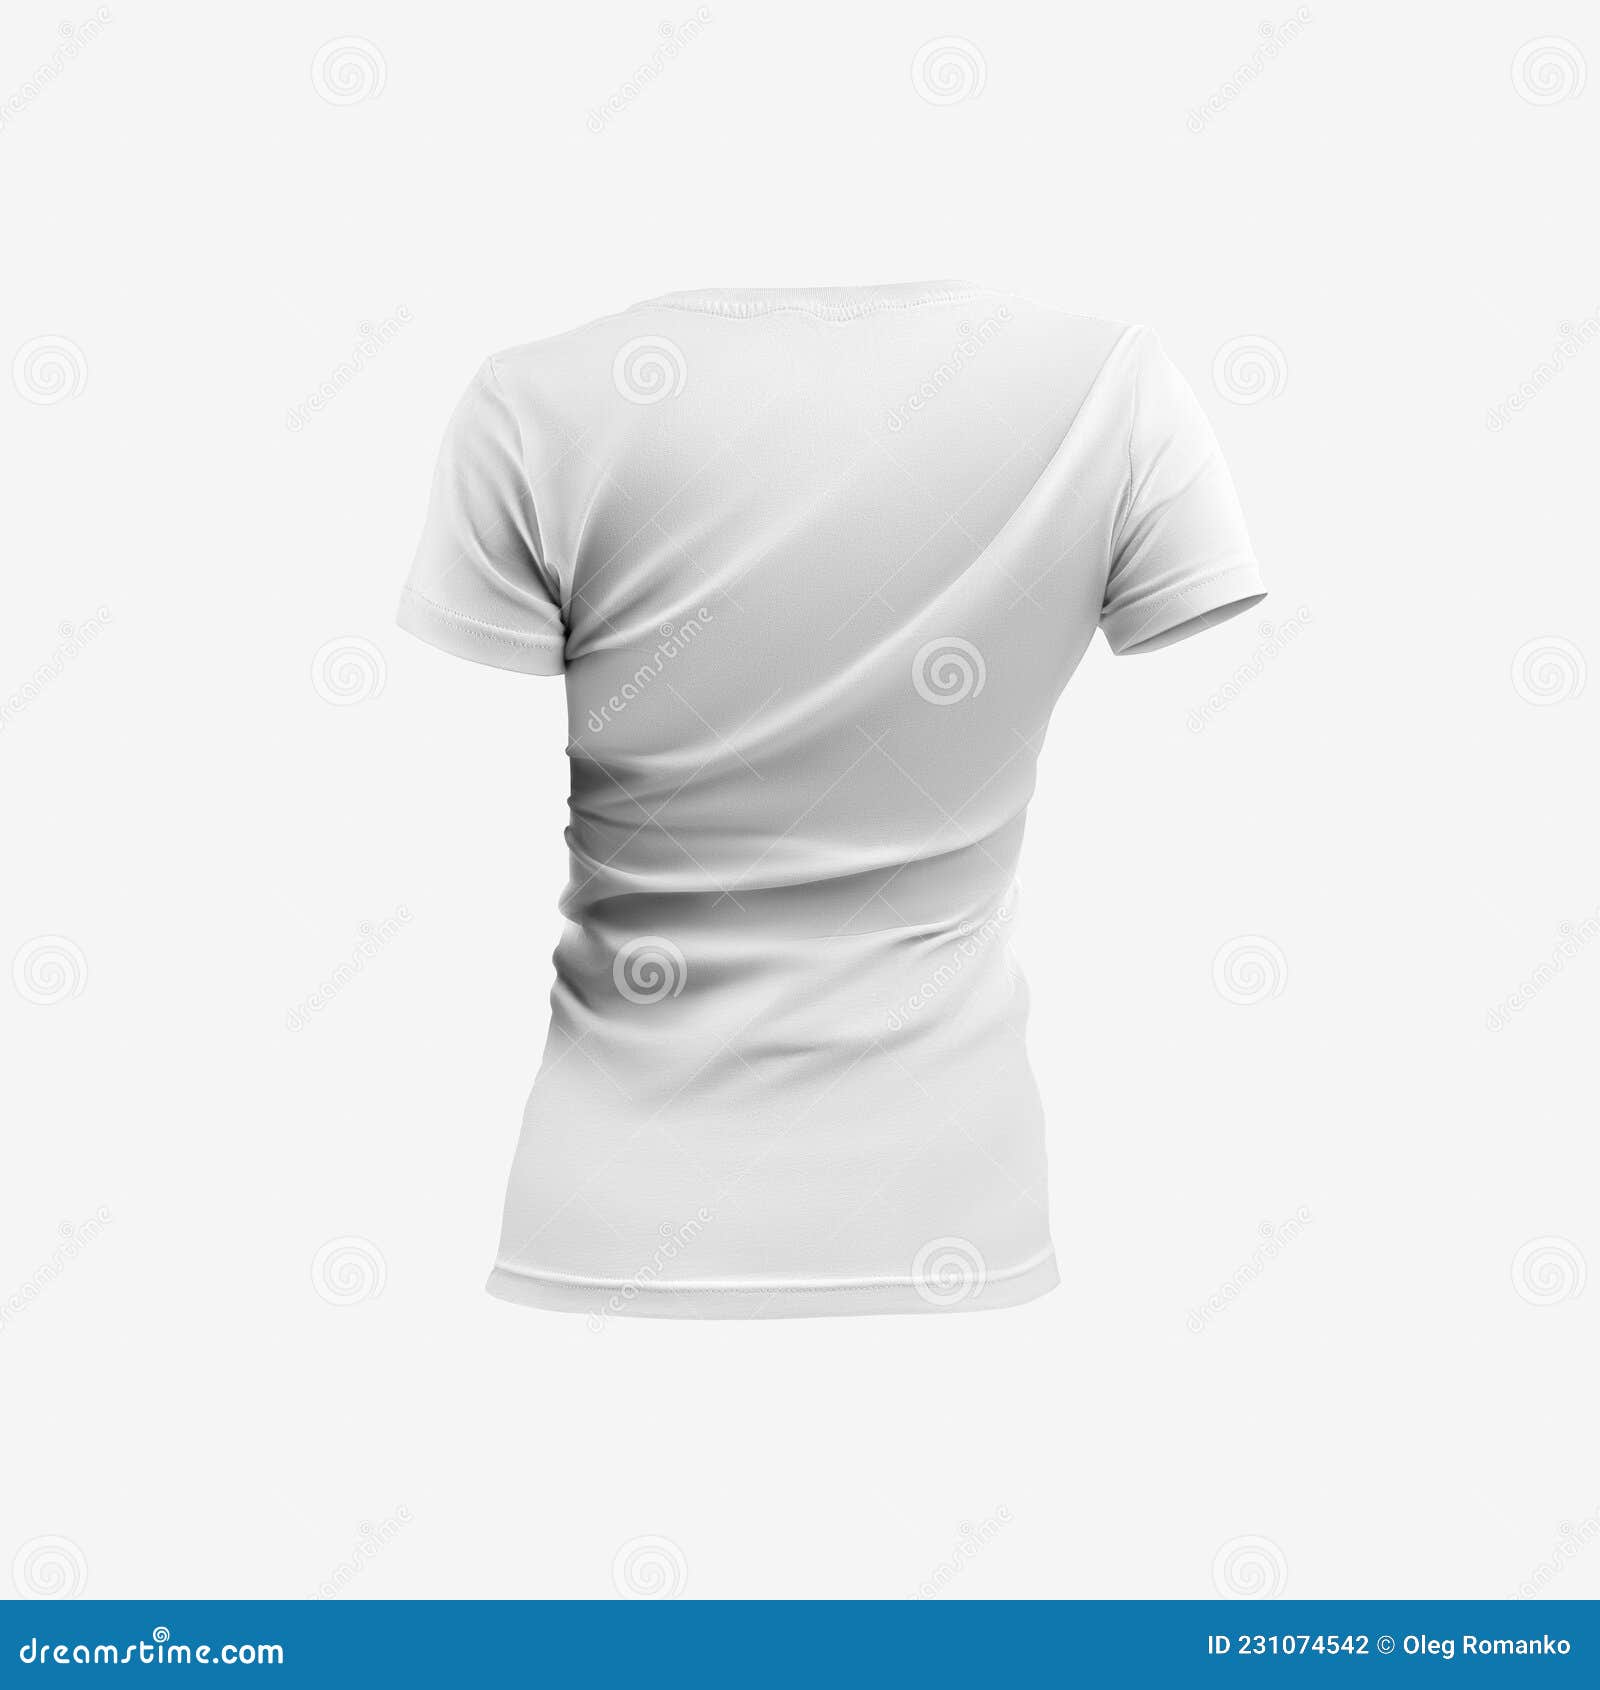 55,393 Tshirt Poster Images, Stock Photos, 3D objects, & Vectors